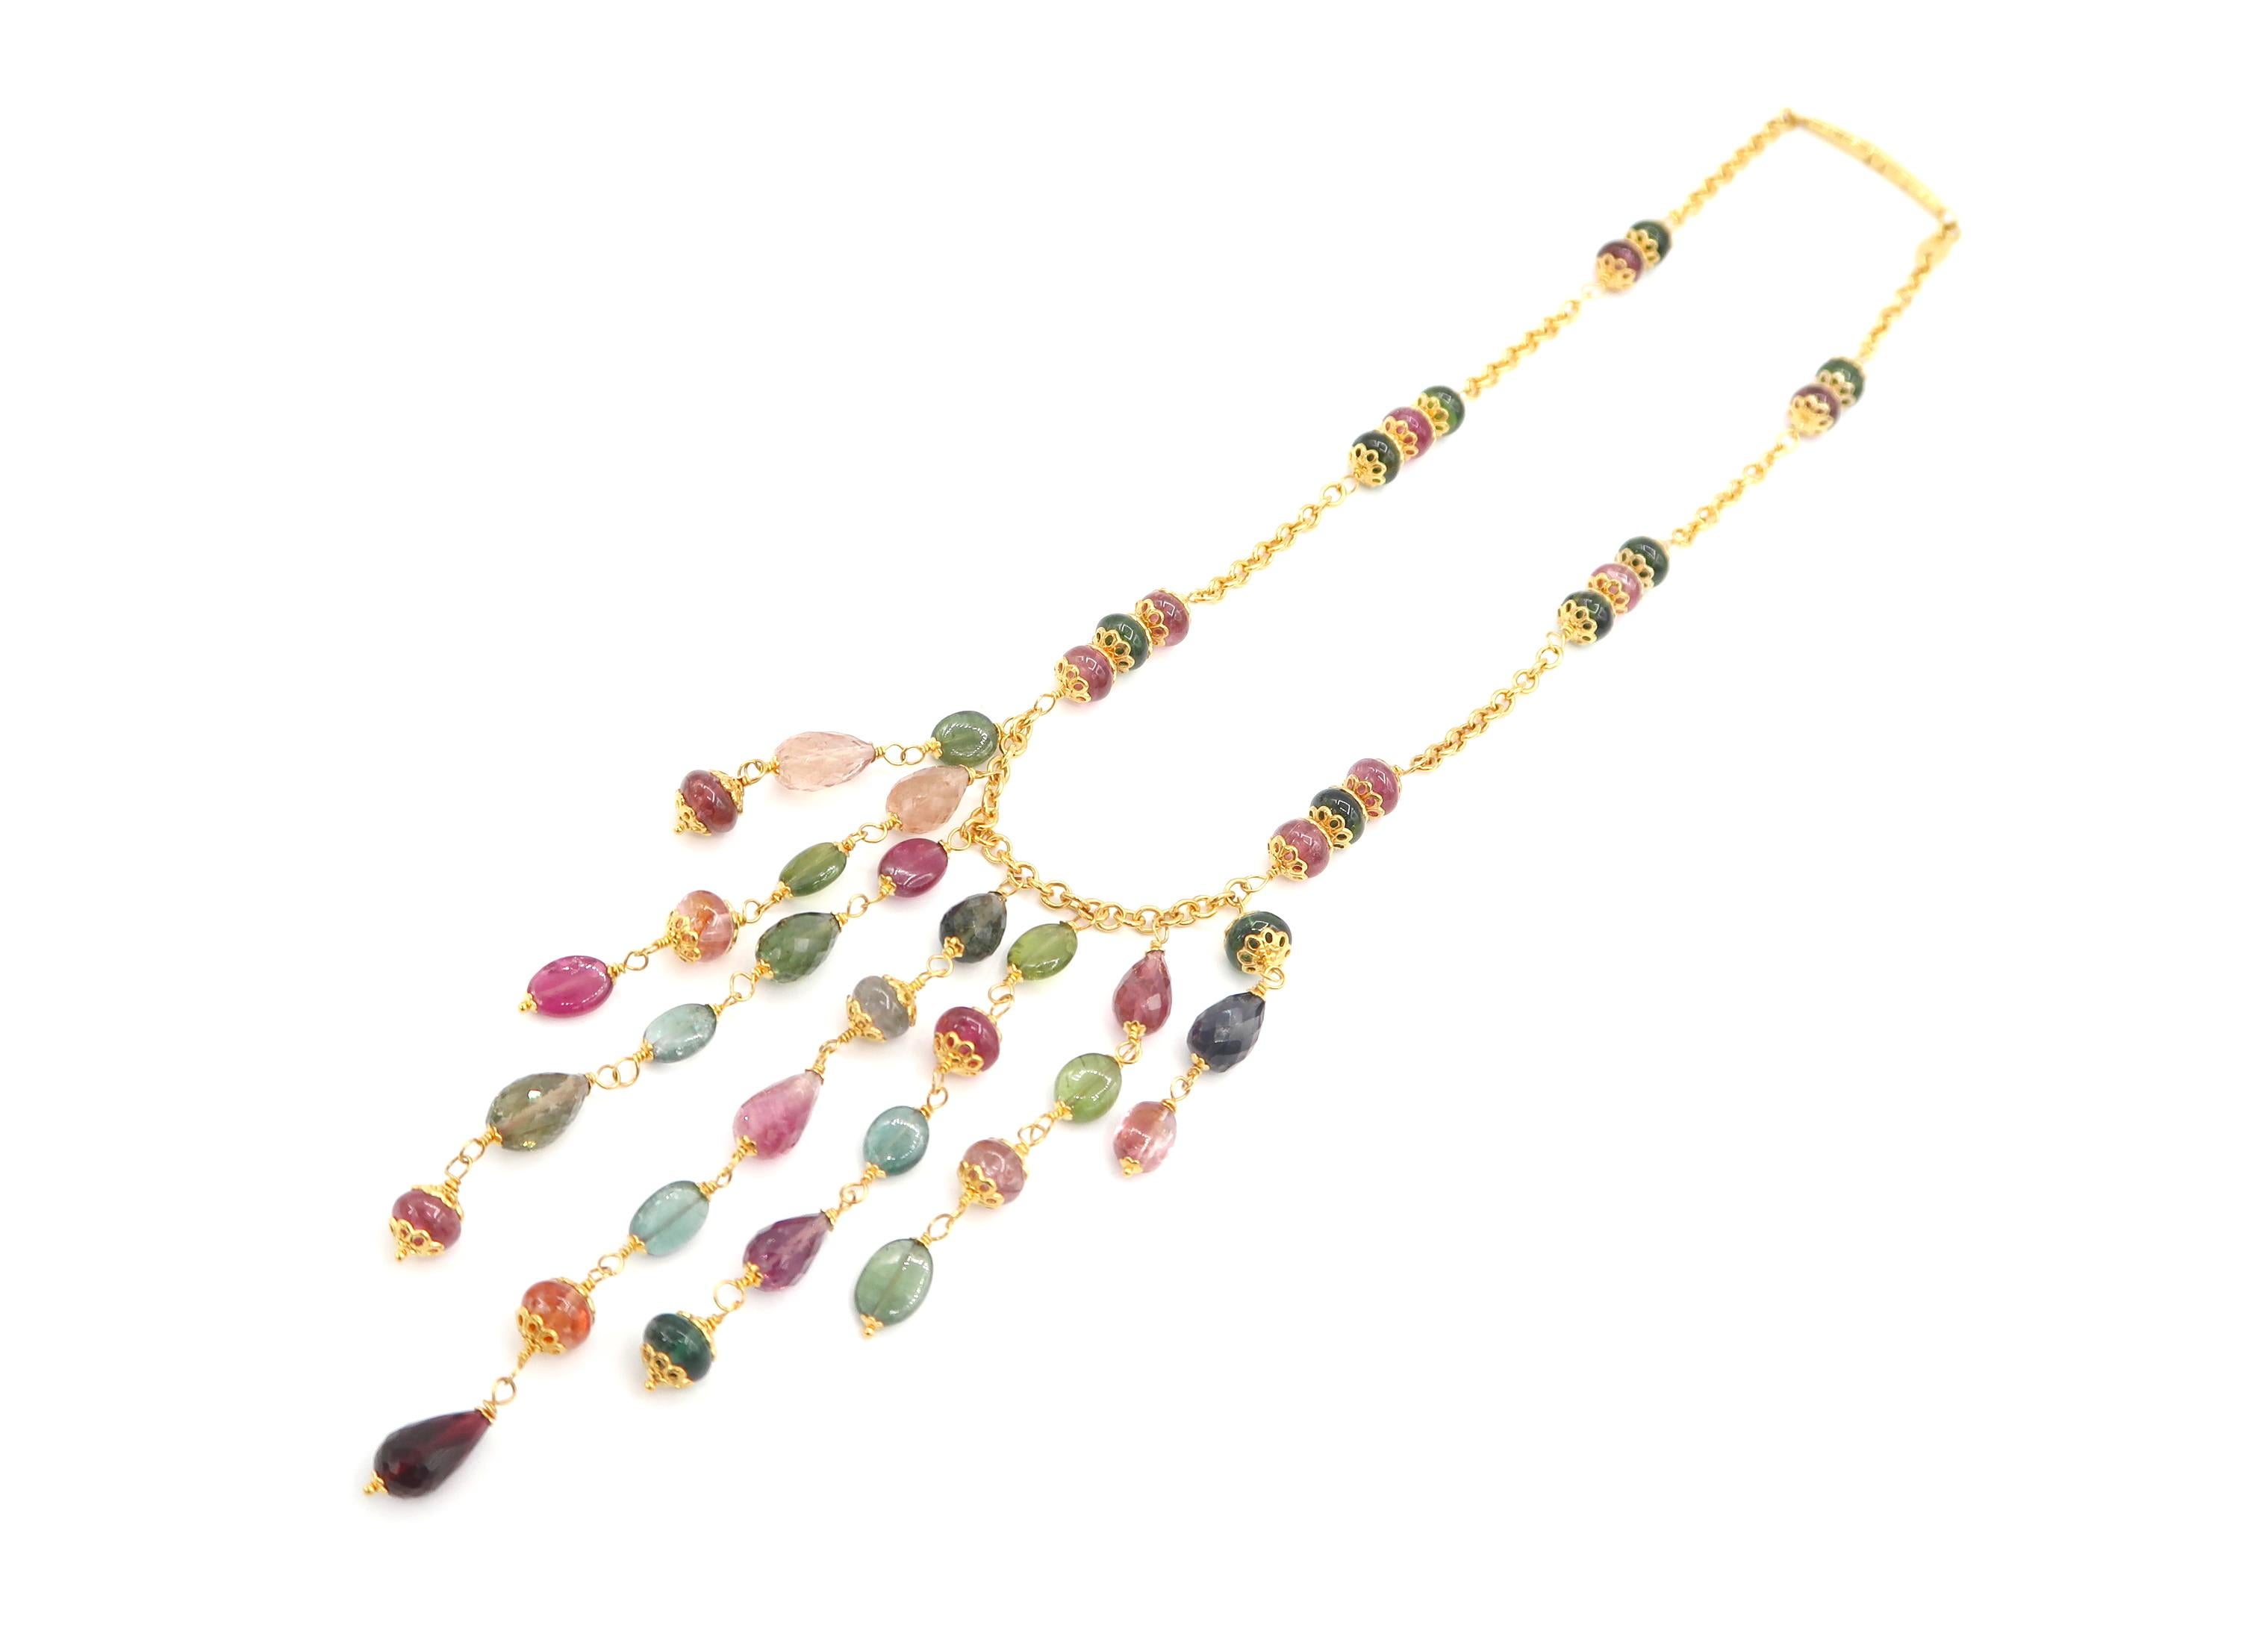 Rossi Colour Stone Bead Chain Necklace

Gold: 18K Gold, 24.98 g
Colour stone beads: 75.10 ct
Length: 15.75 inches